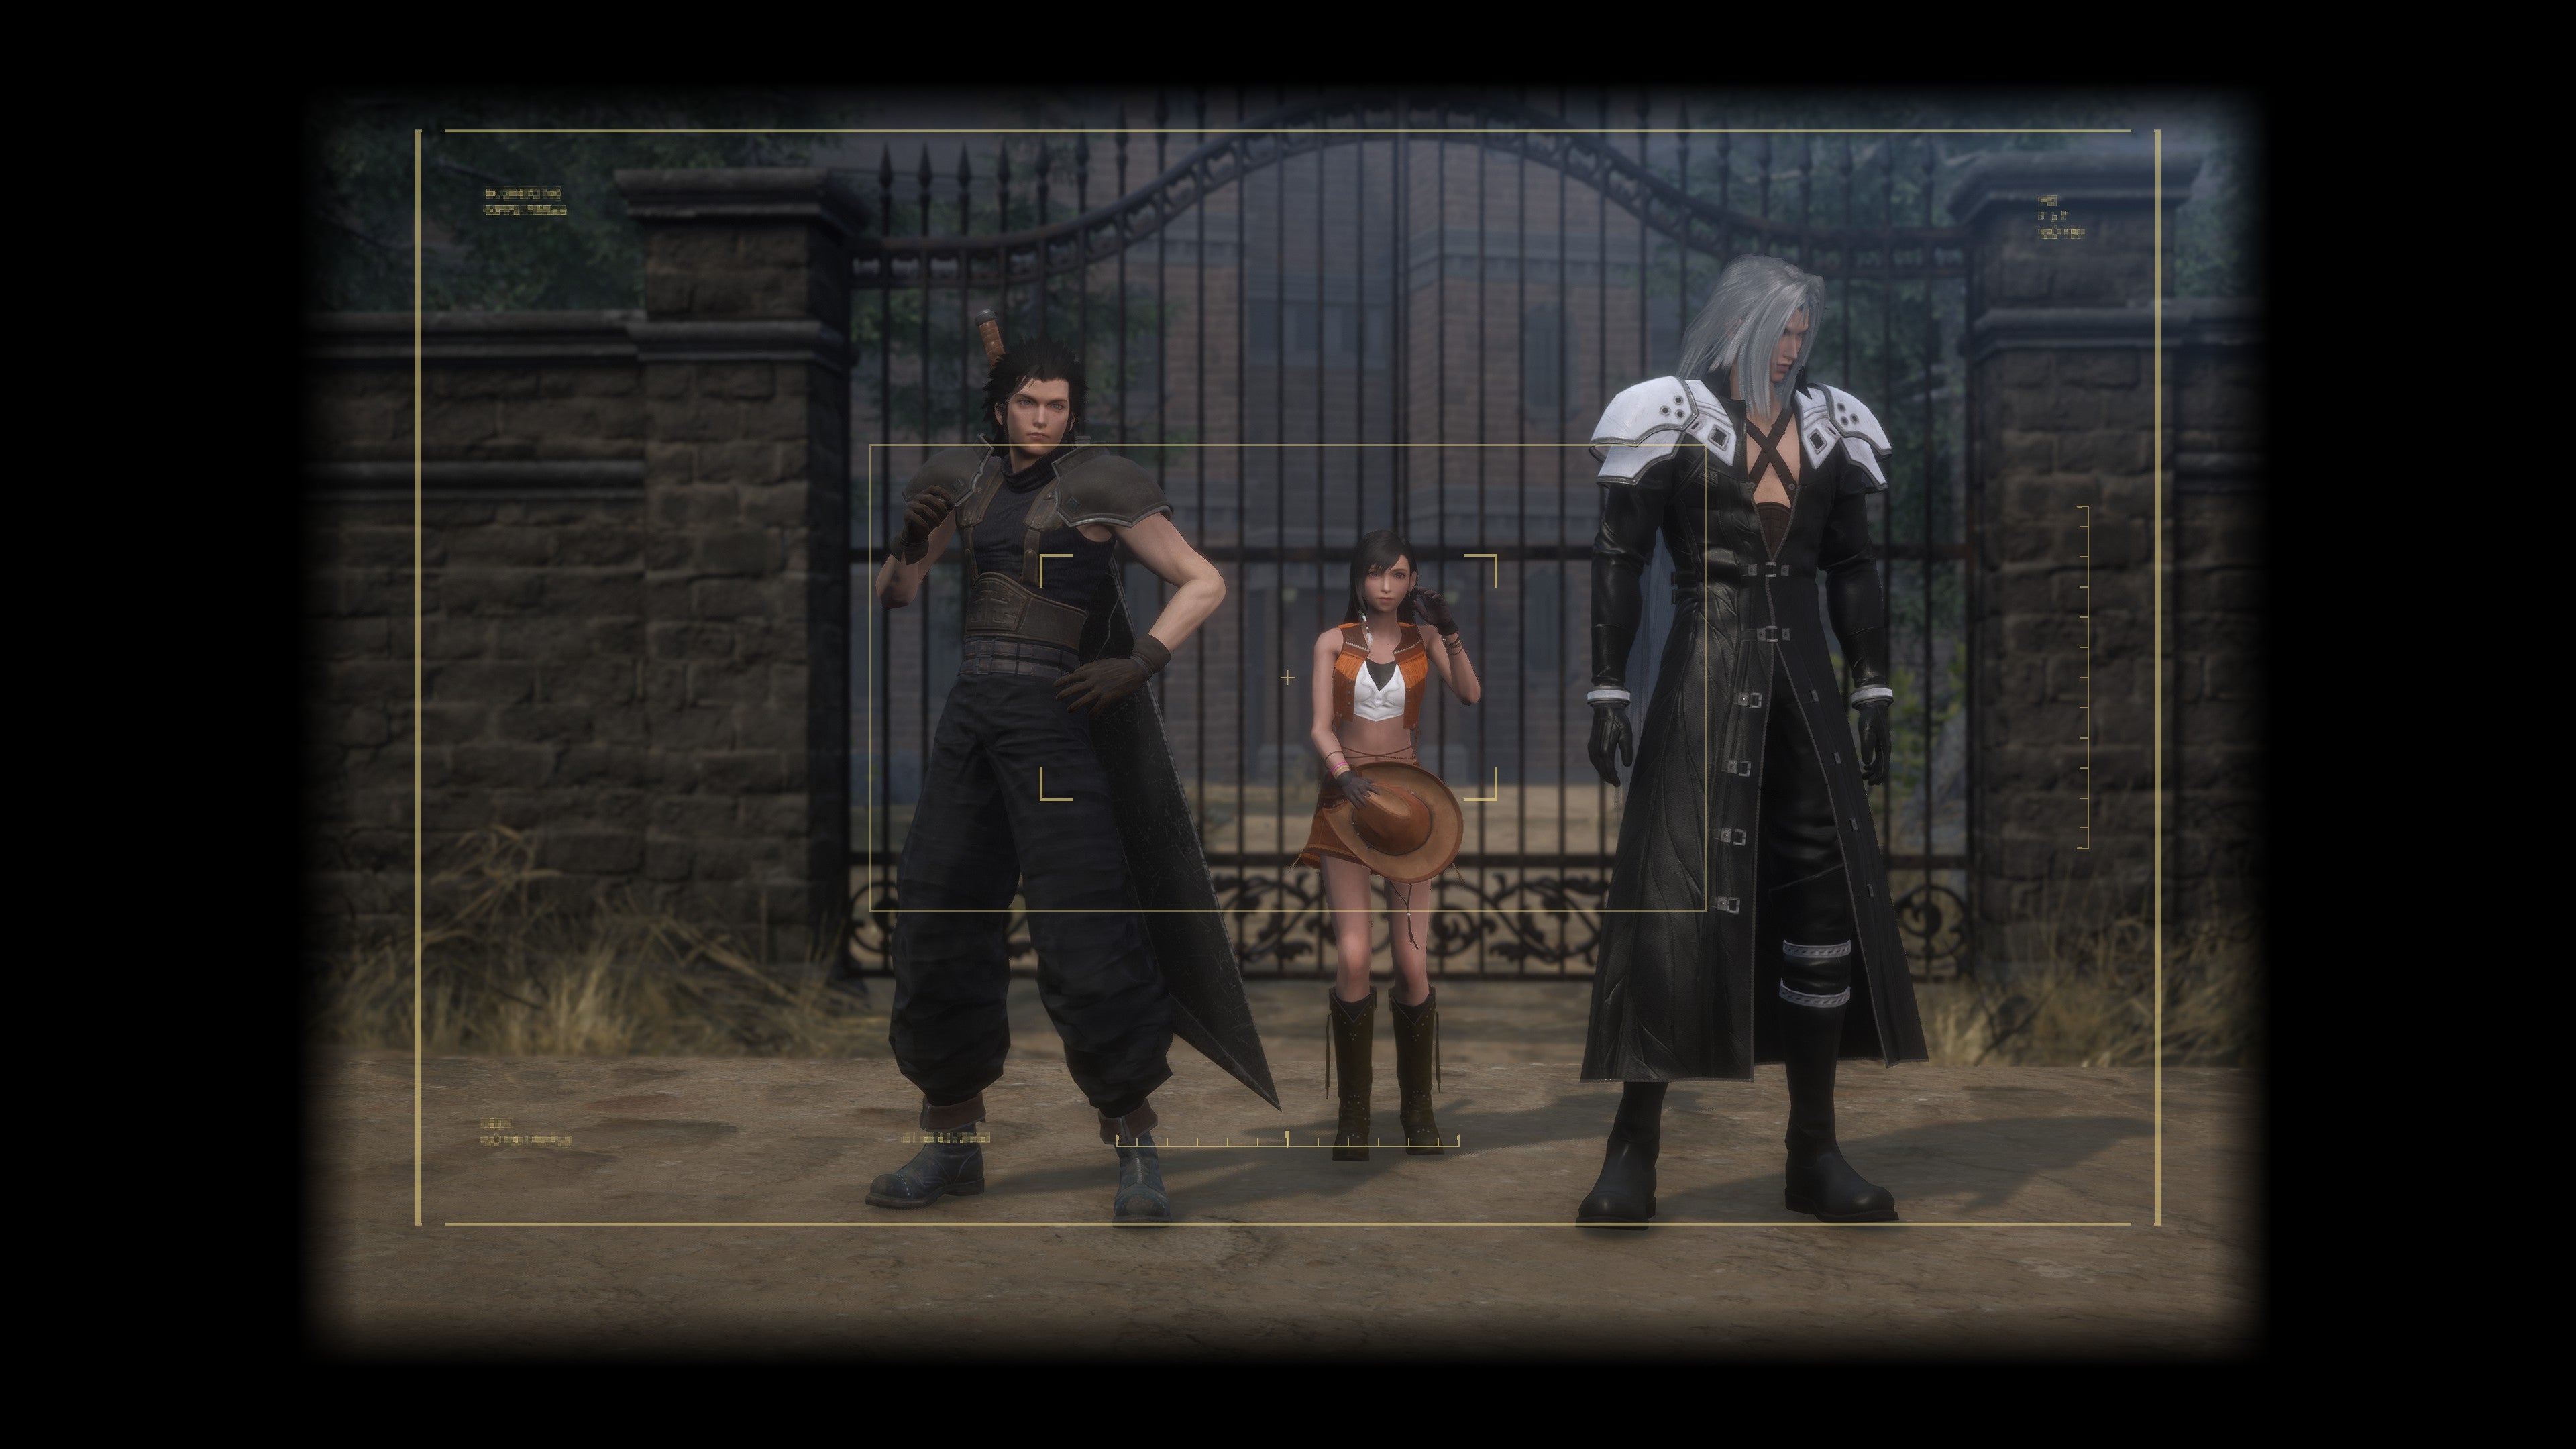 Zack, Tifa and Sephiroth stand to pose for a photograph in Crisis Core - Final Fantasy VII - Reunion